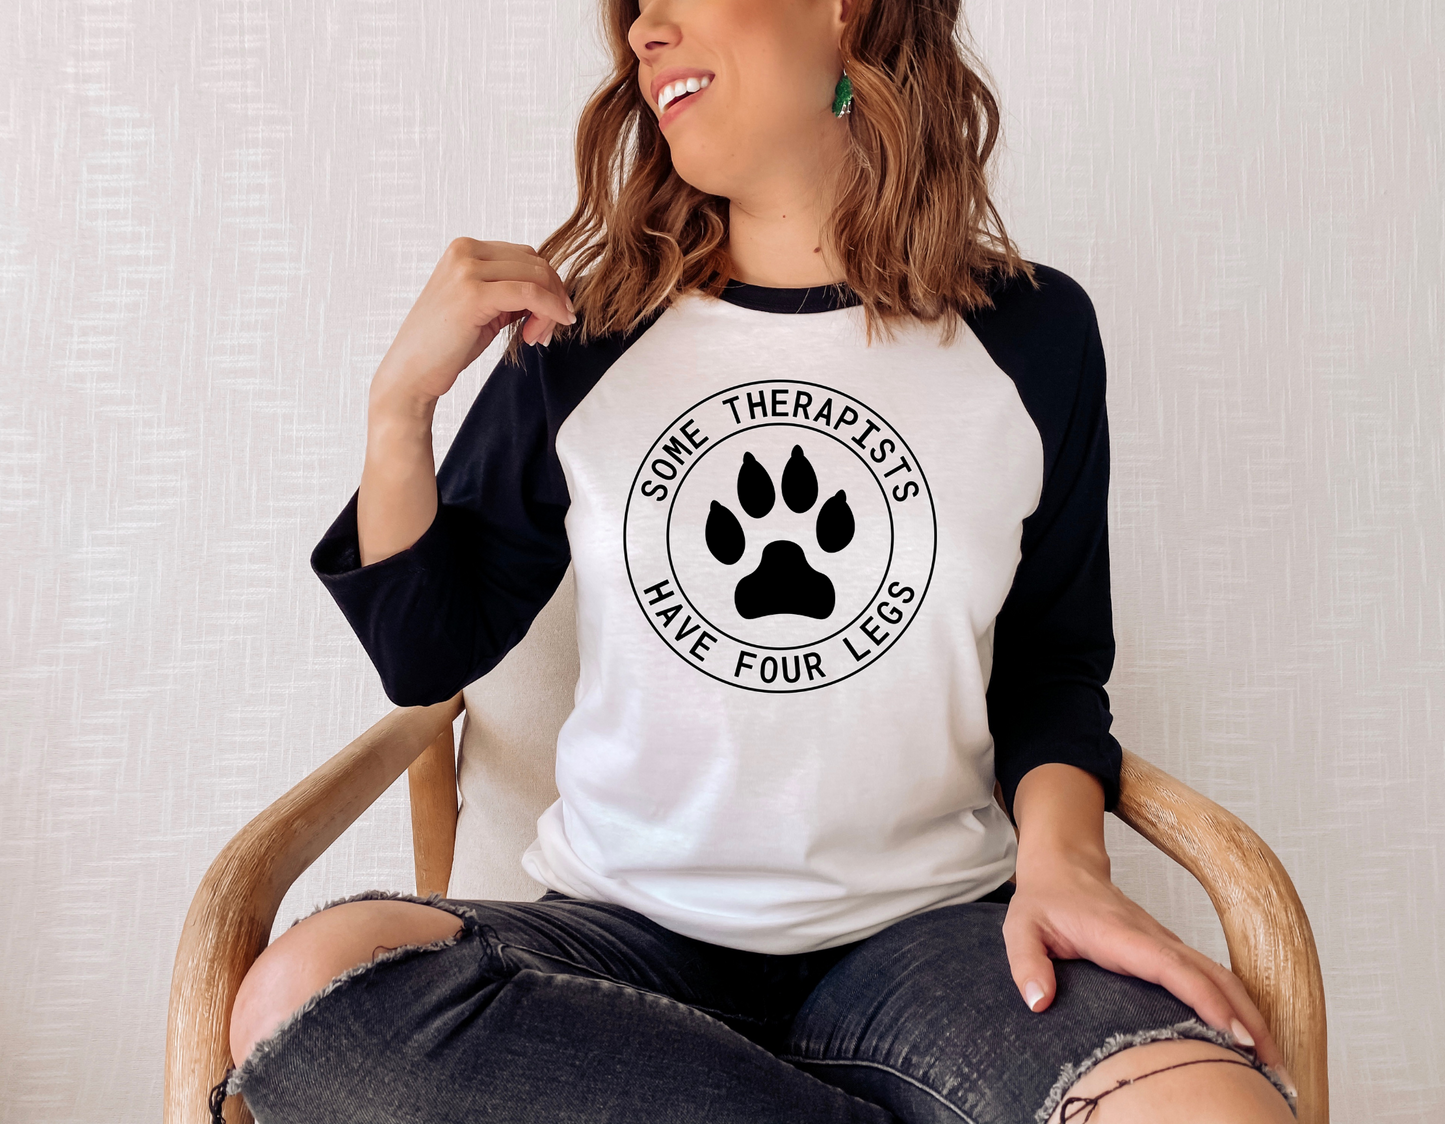 Some Therapists Have Four Legs Baseball T Shirt